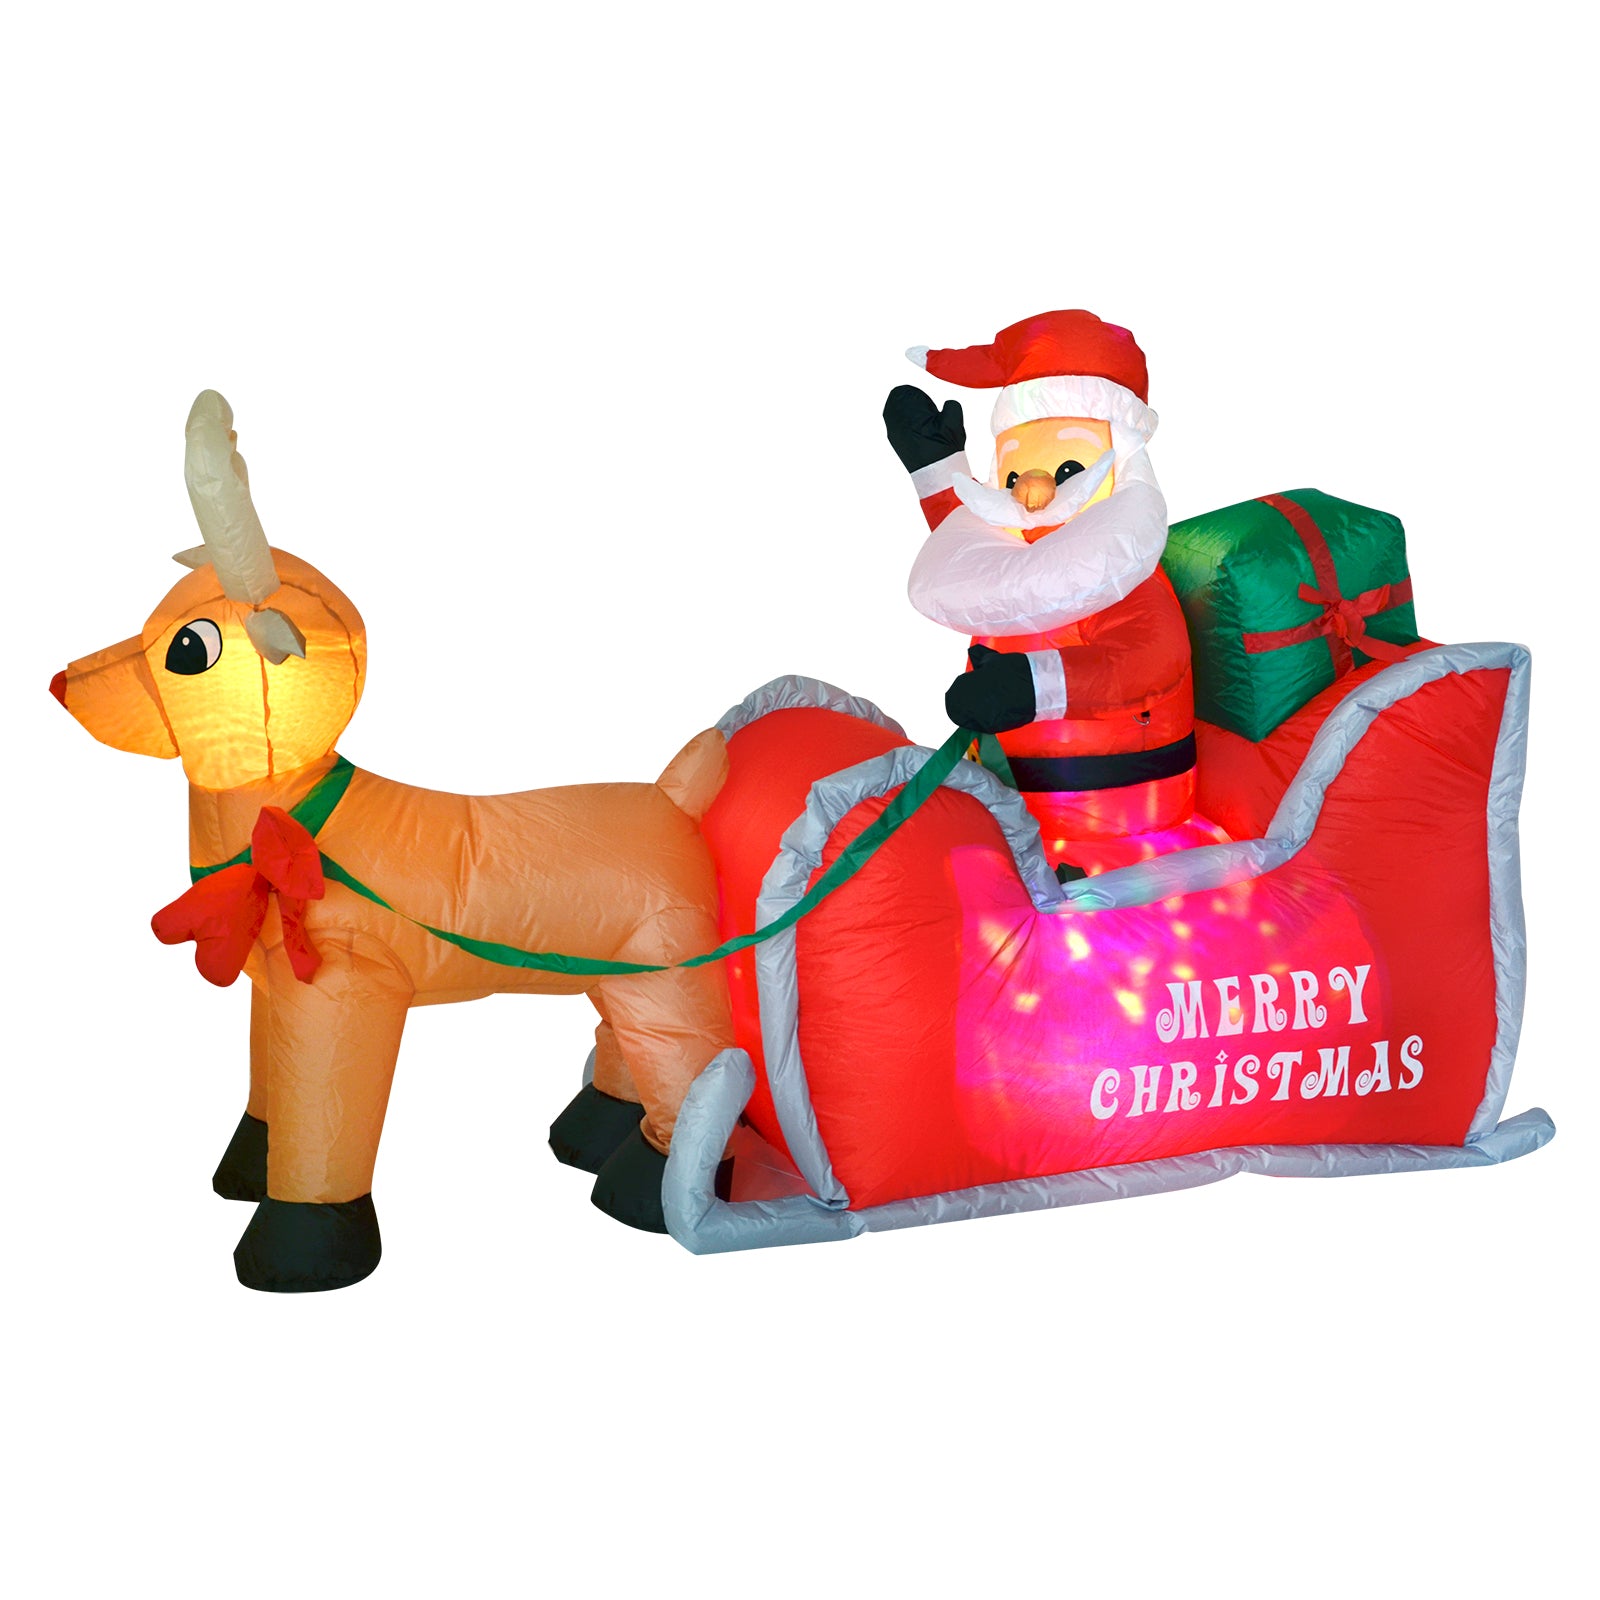 santa sleigh and reindeer large 4ft inflatable decoration with warm white lights